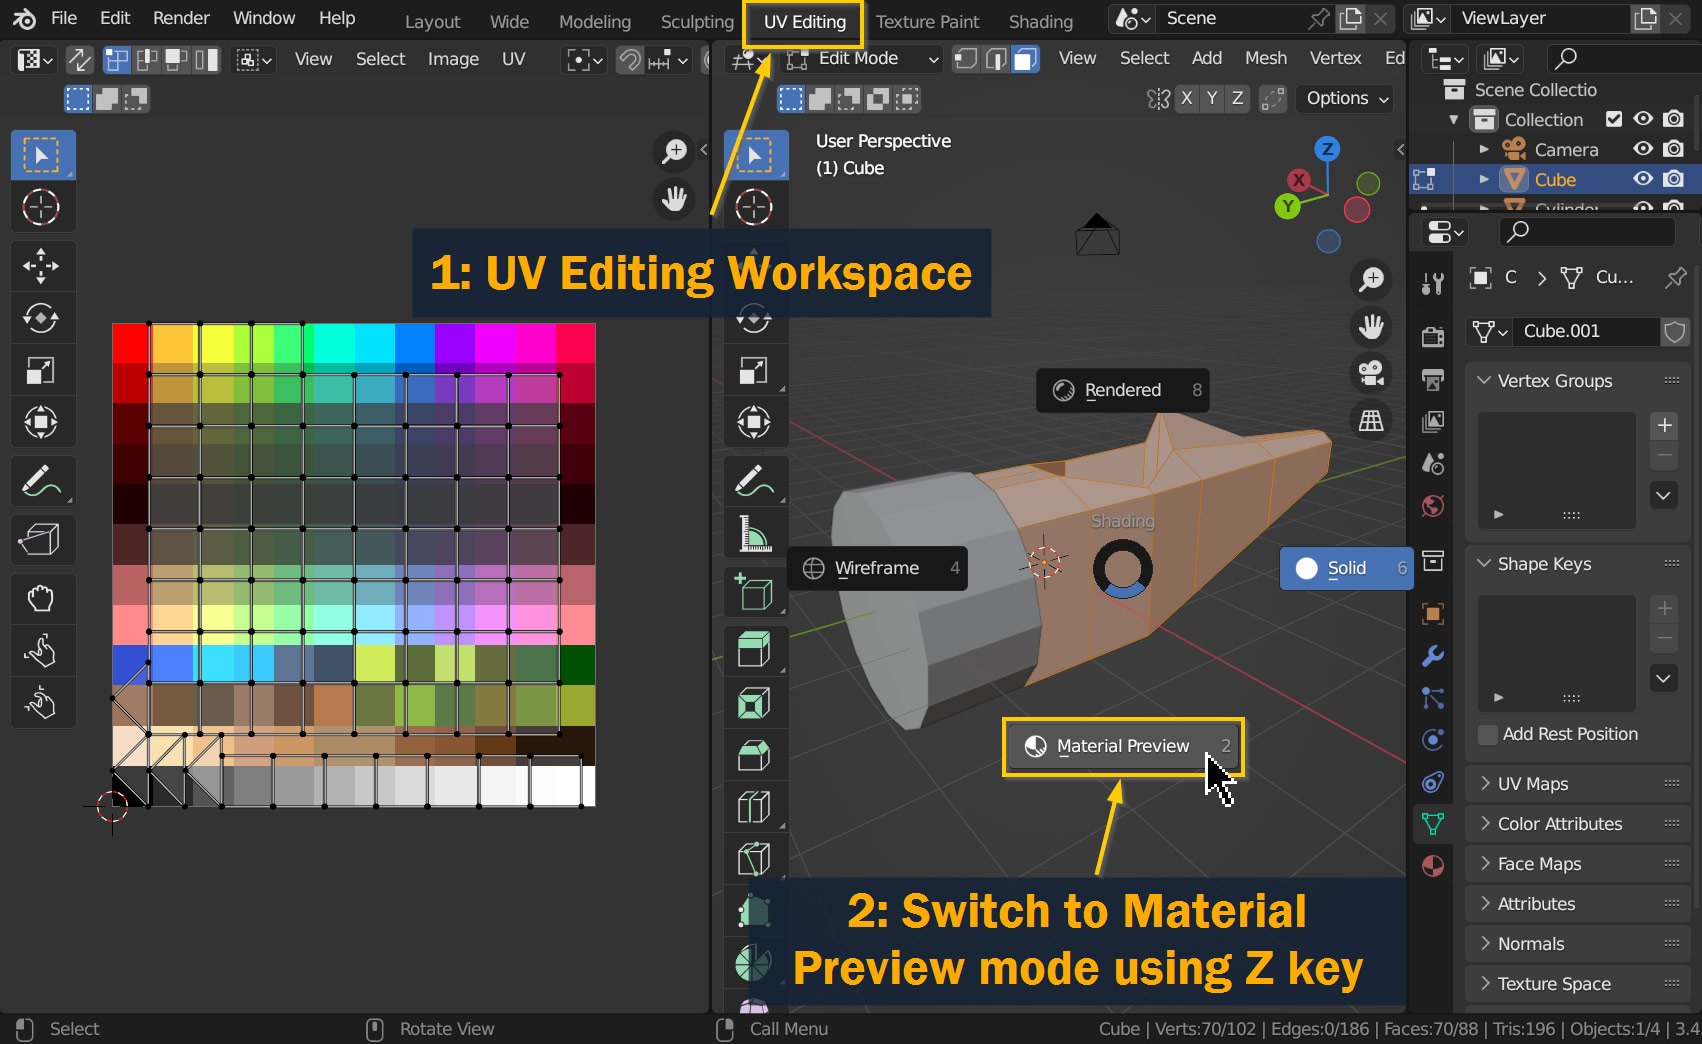 Entering the UV Editing workspace and switching to Material Preview mode